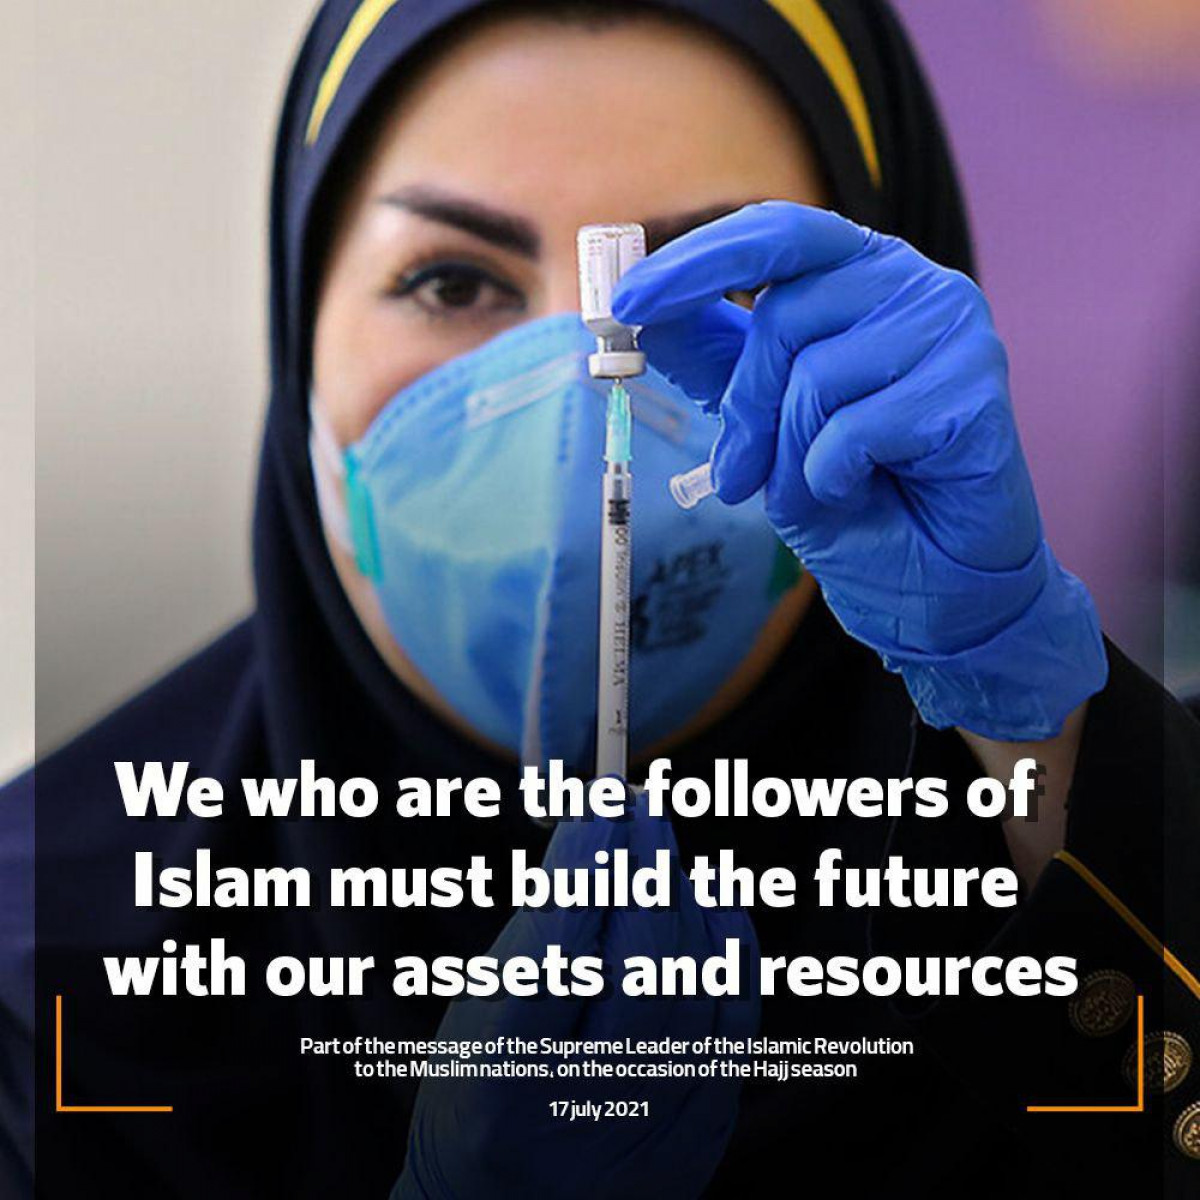 We who are the followers of Islam must build the future with our assets and resources